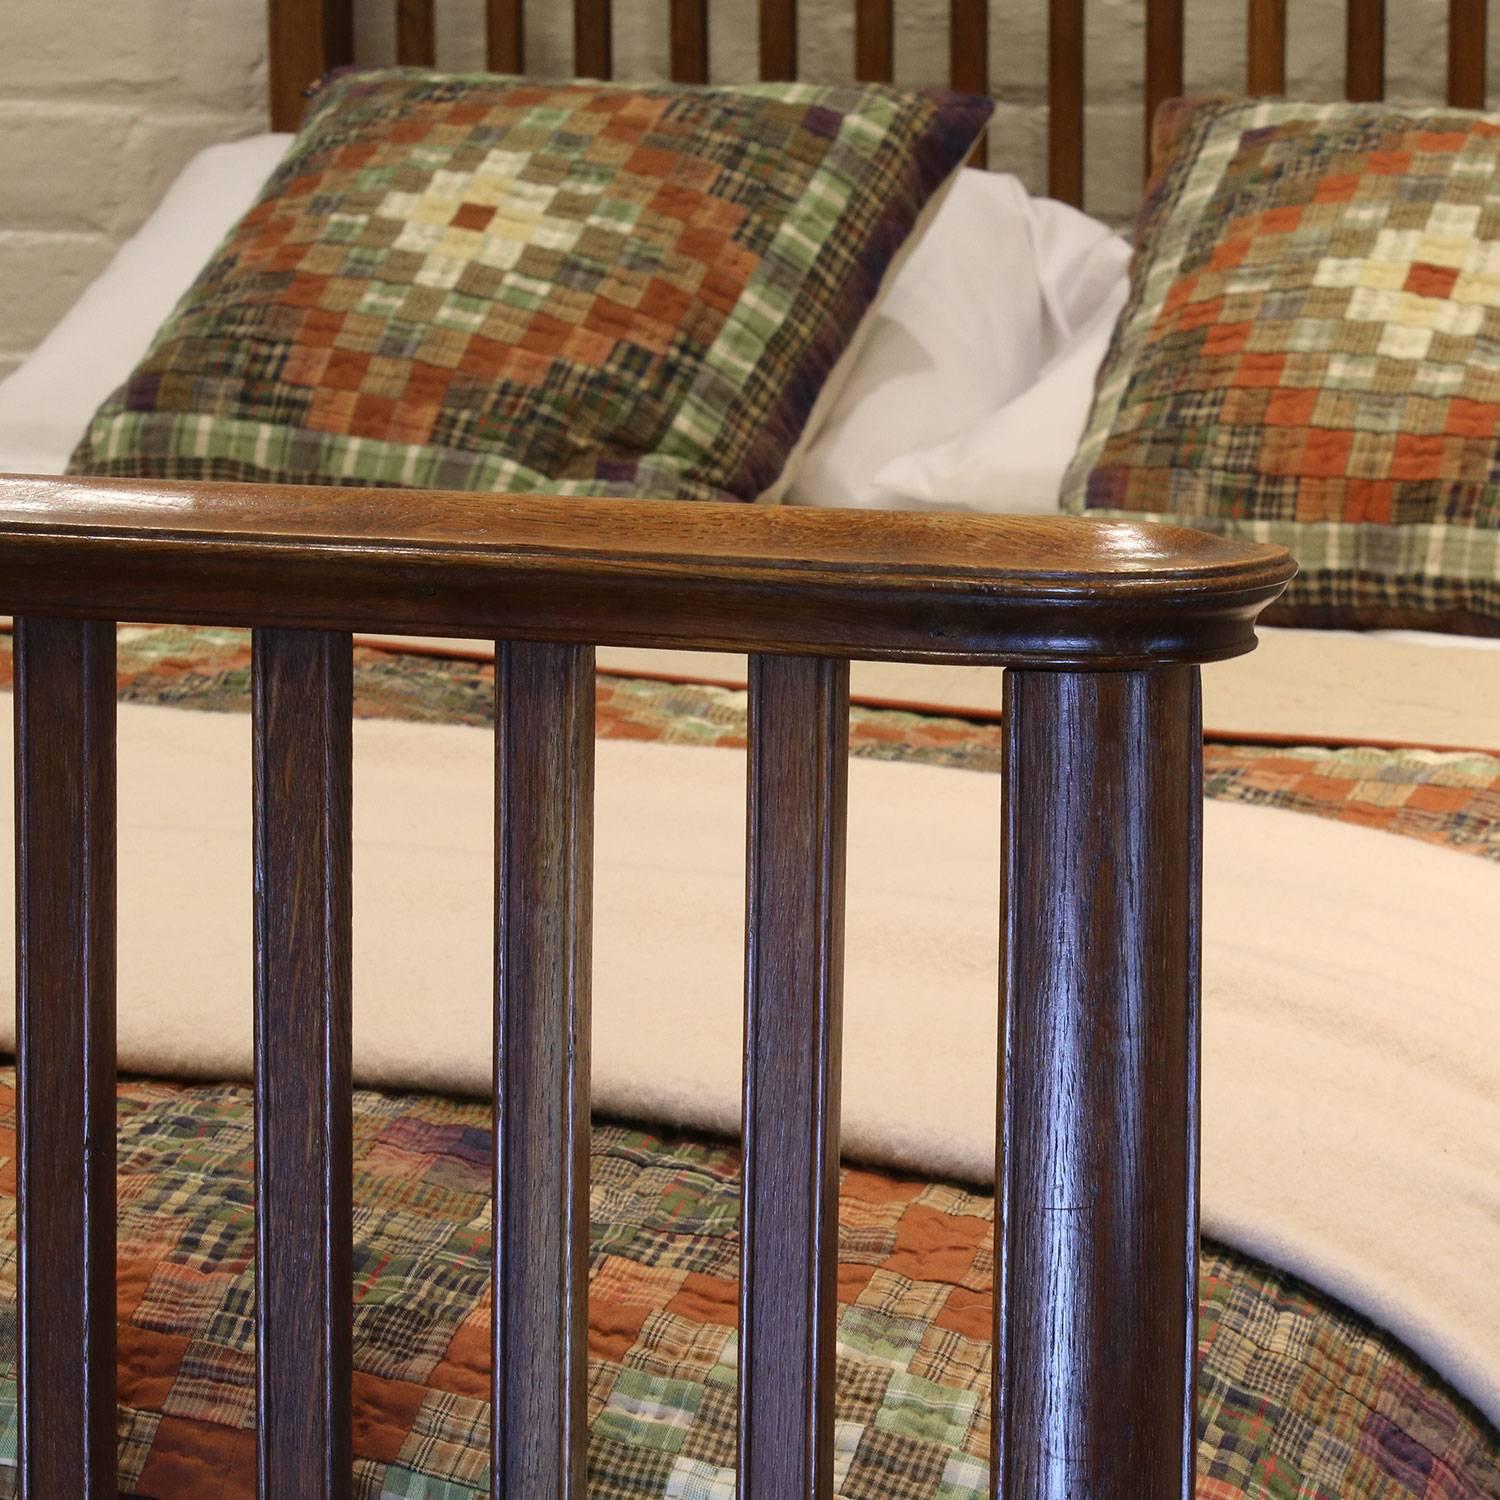 An attractive Edwardian wooden slatted bed in light oak.

This bed accepts a 4ft 6in wide double base and mattress set.

The price is for the bed alone - the base, mattress, bedding and bed linen are extra and available for purchase.
    